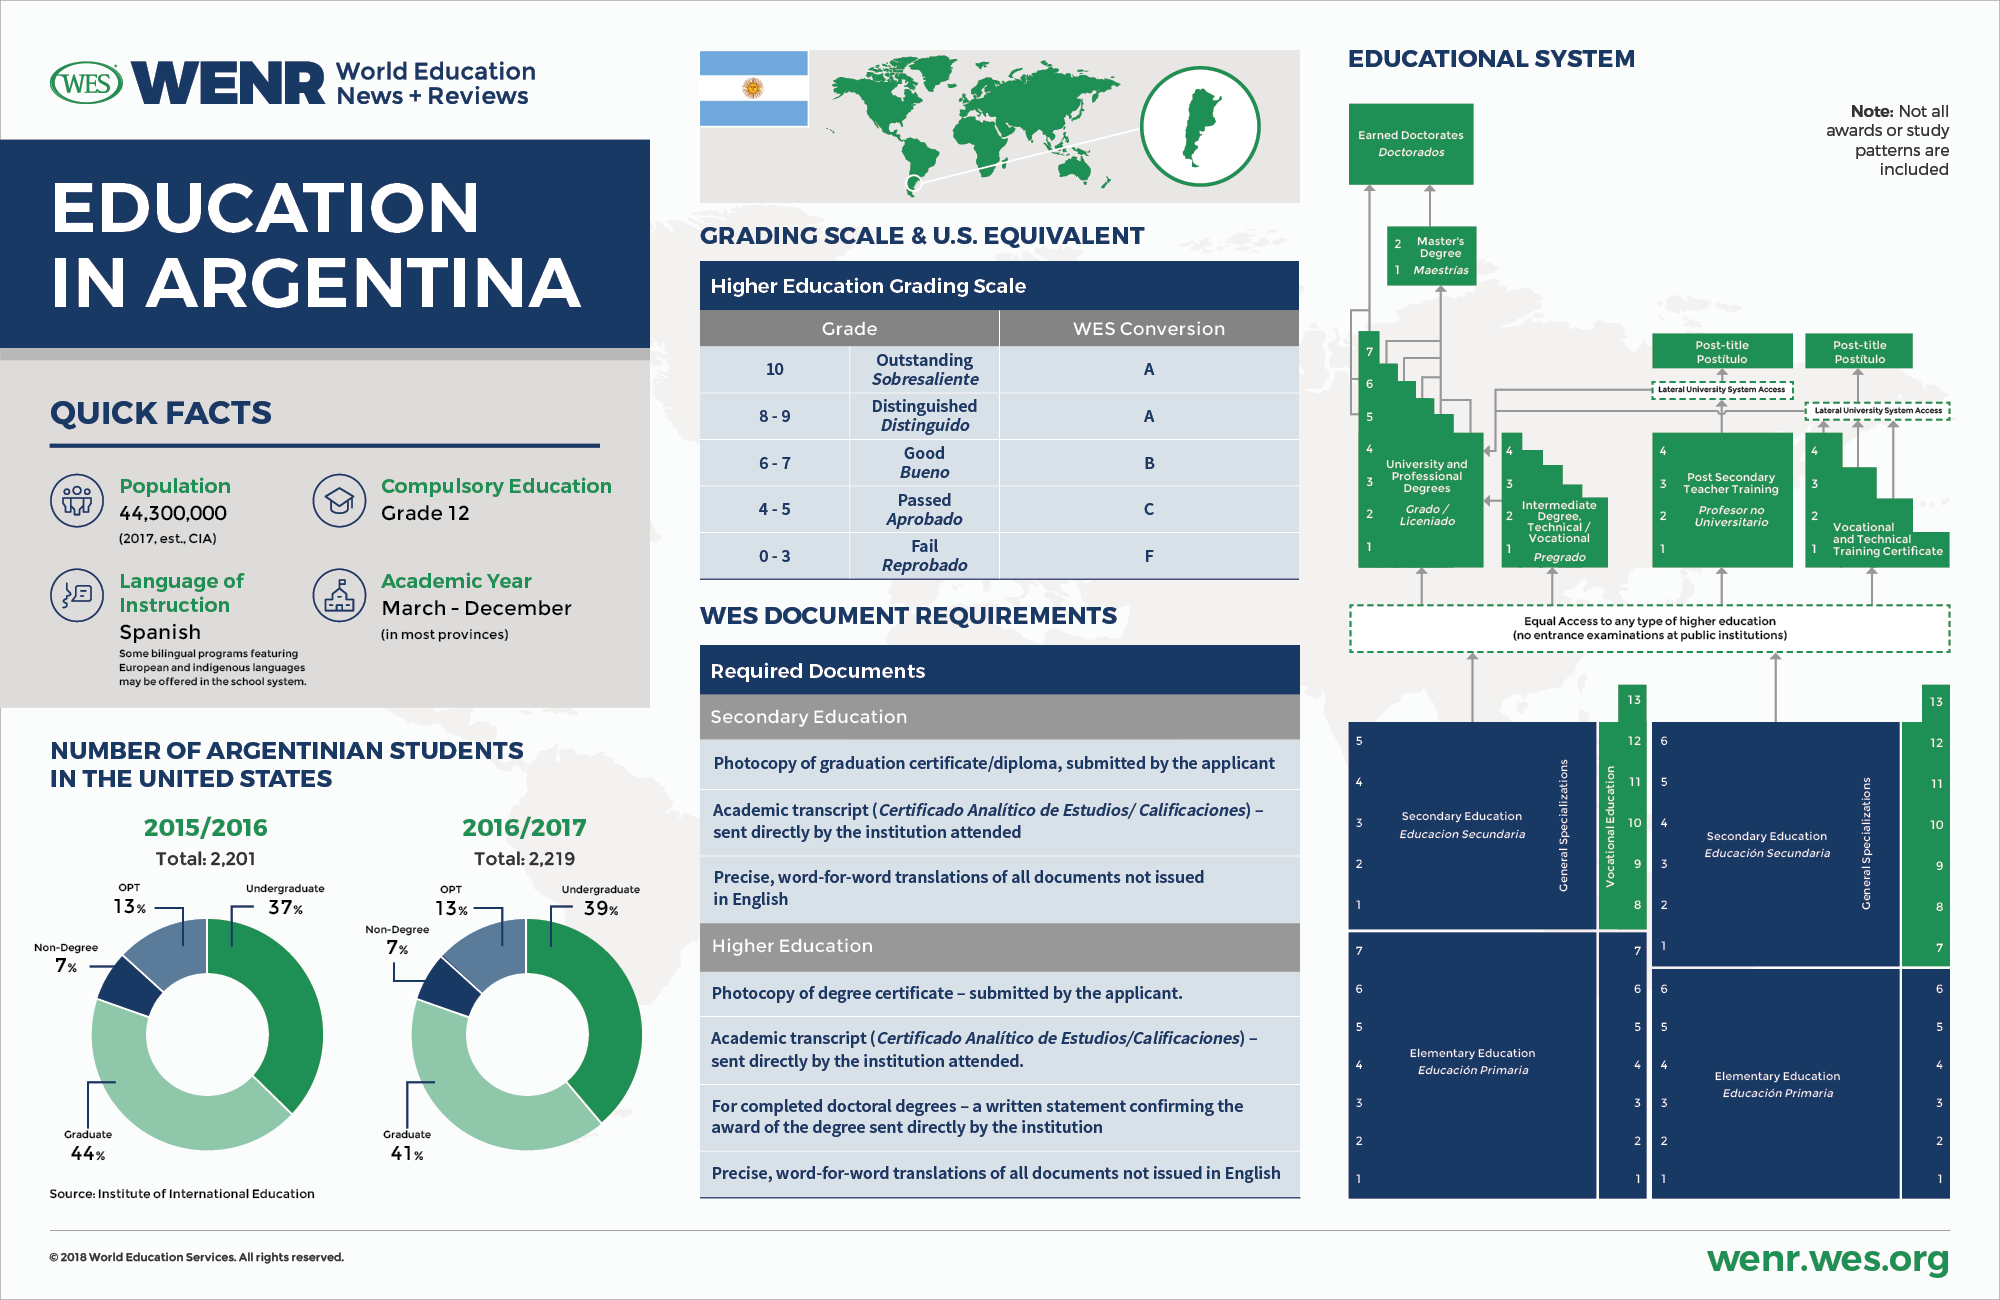 An infographic showing fast facts about Argentina's educational system and international student mobility landscape. 